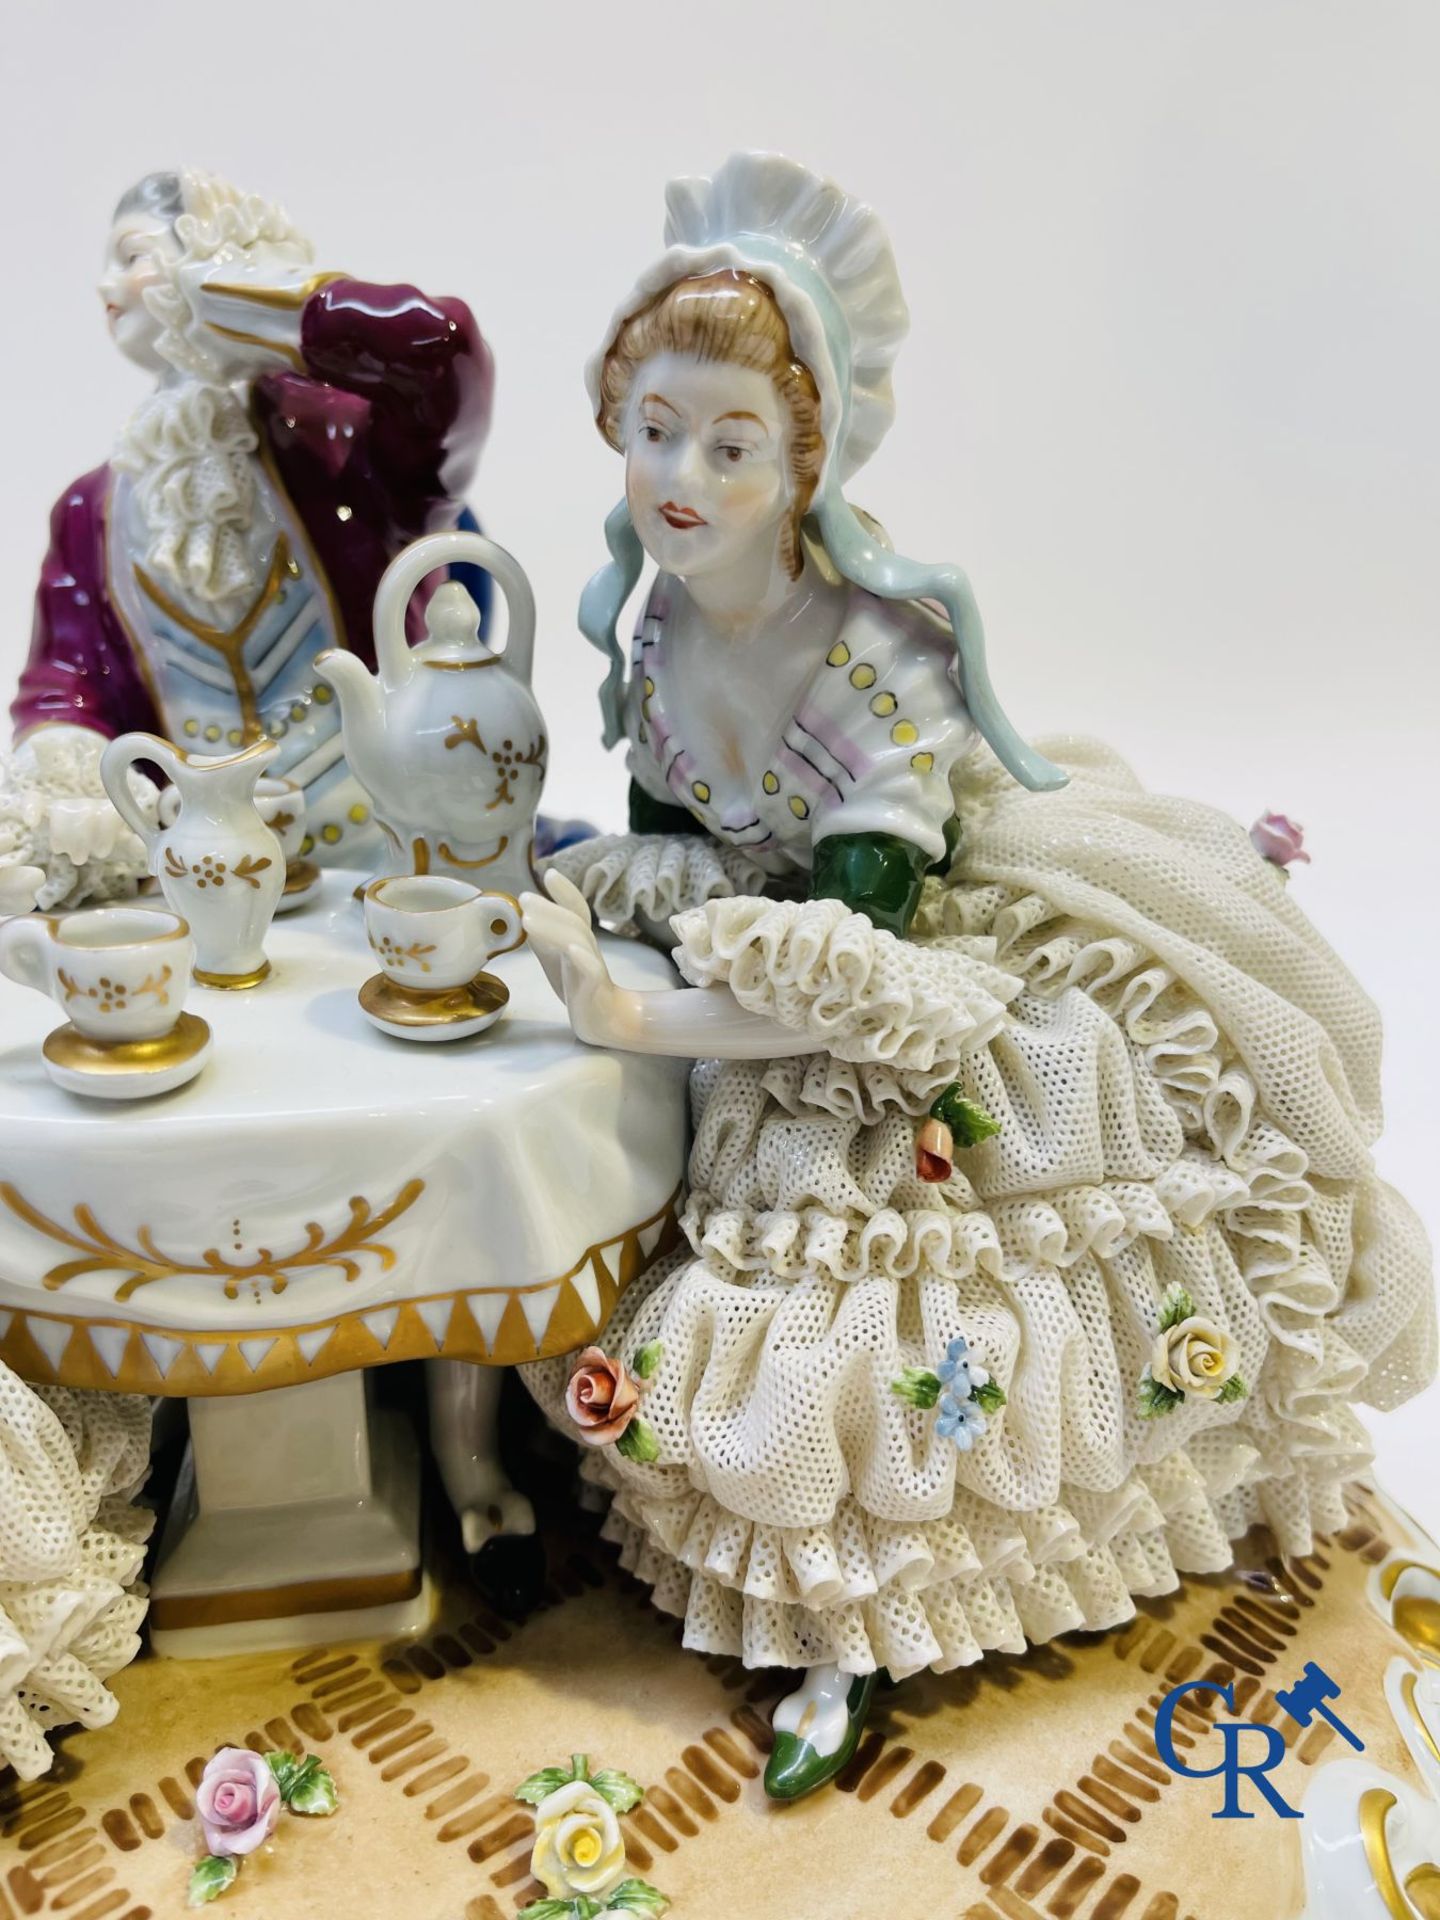 Porcelain: Unterweissbach: "In the tea room". - Image 3 of 9